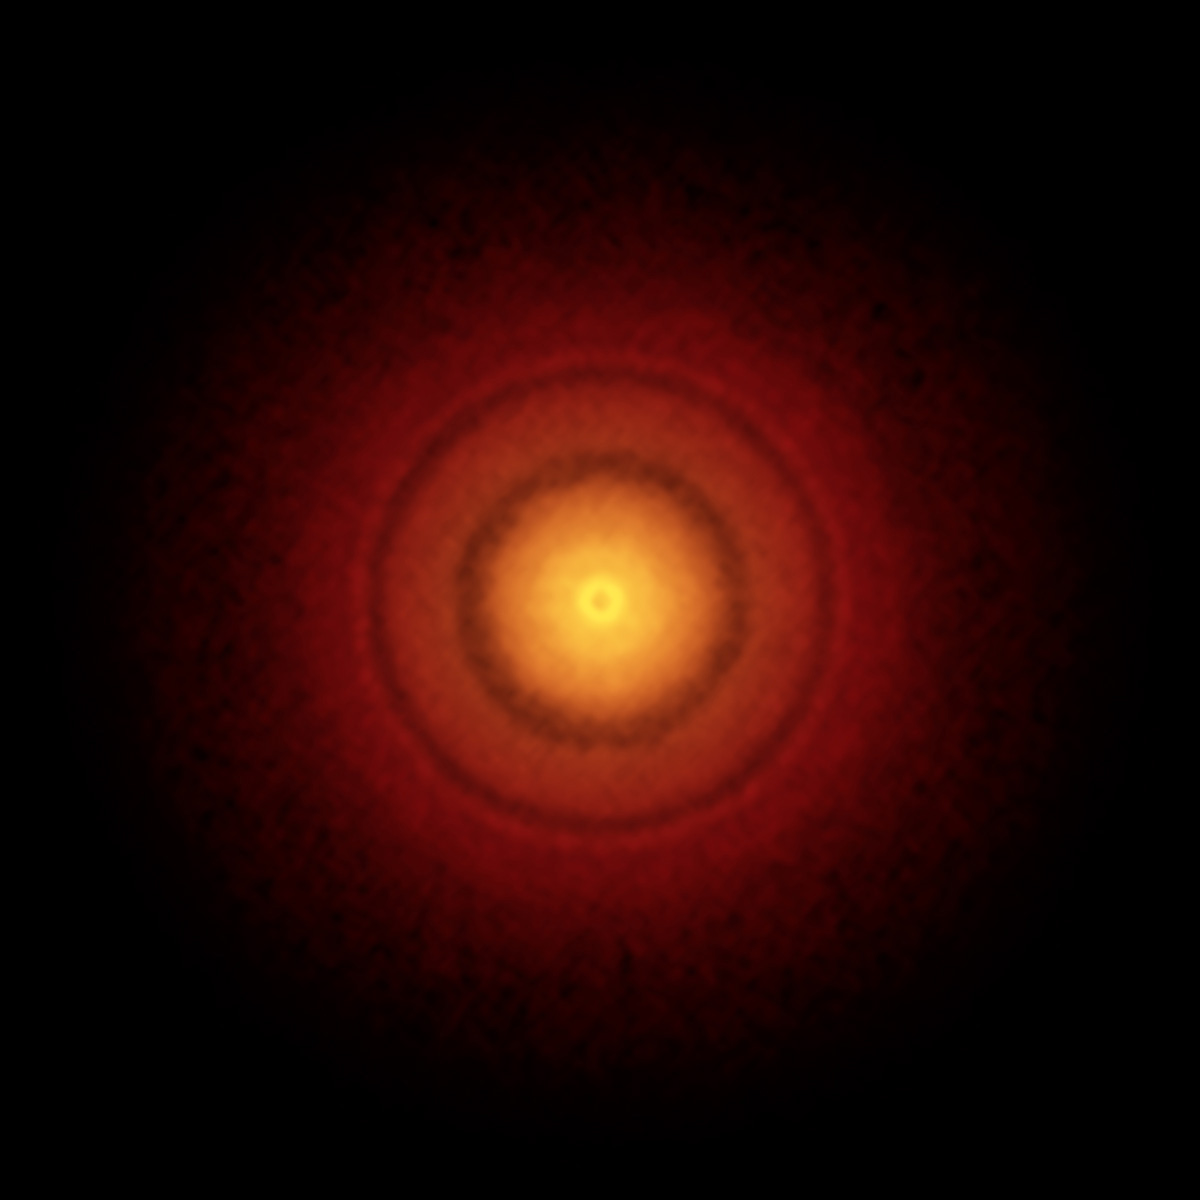 ALMA image of the disk around the young star TW Hydrae. ALMA obtained its best image of a protoplanetary disk to date, revealing the classic rings and gaps that signify planets are in formation in this system.